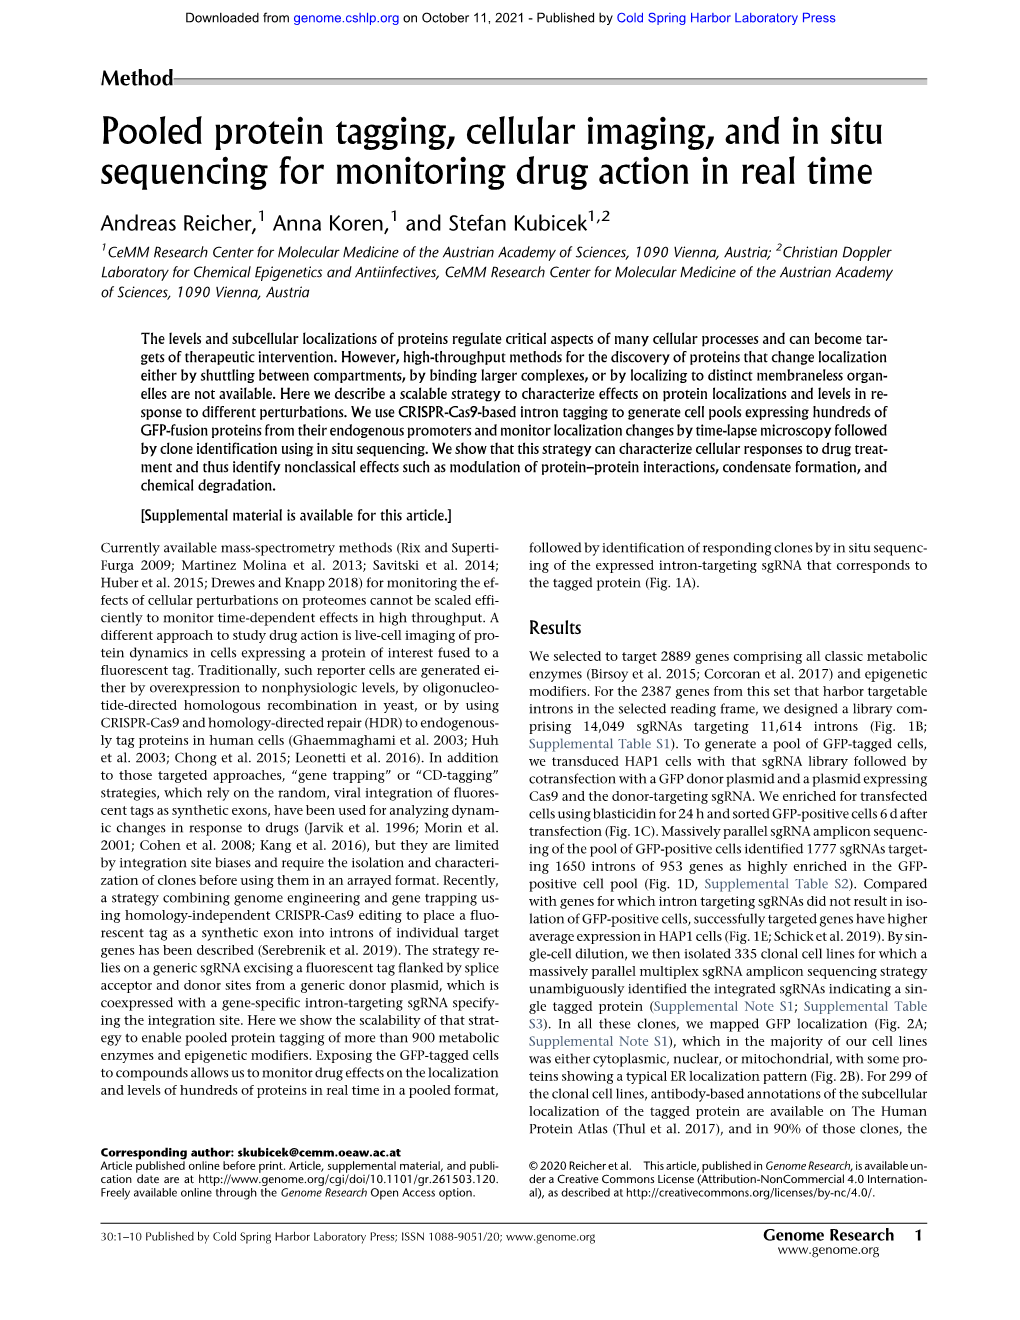 Pooled Protein Tagging, Cellular Imaging, and in Situ Sequencing for Monitoring Drug Action in Real Time